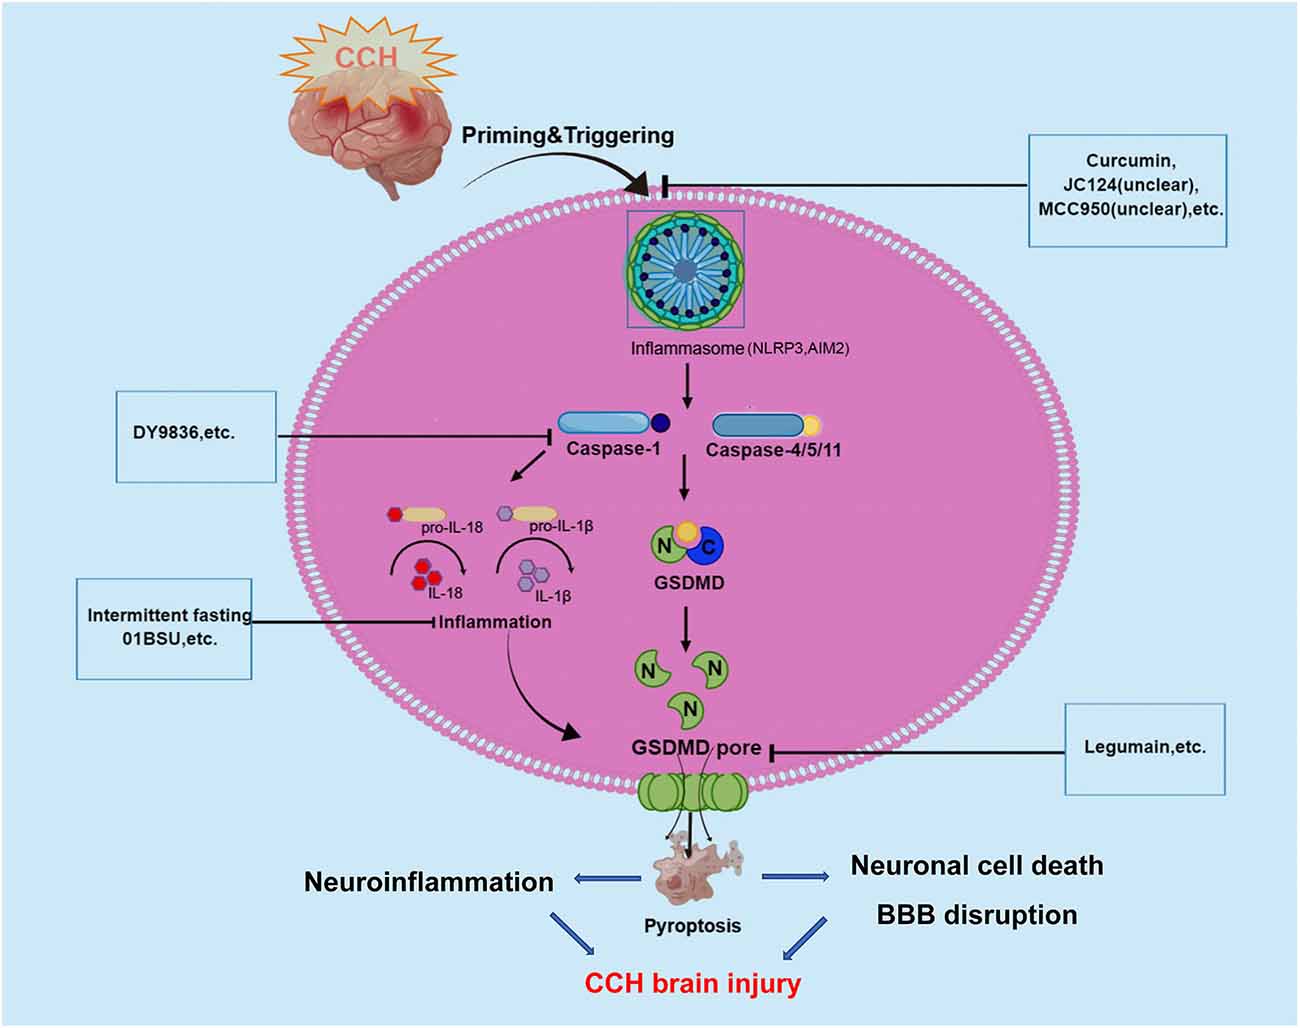 Frontiers | What type of cell death occurs in chronic cerebral 